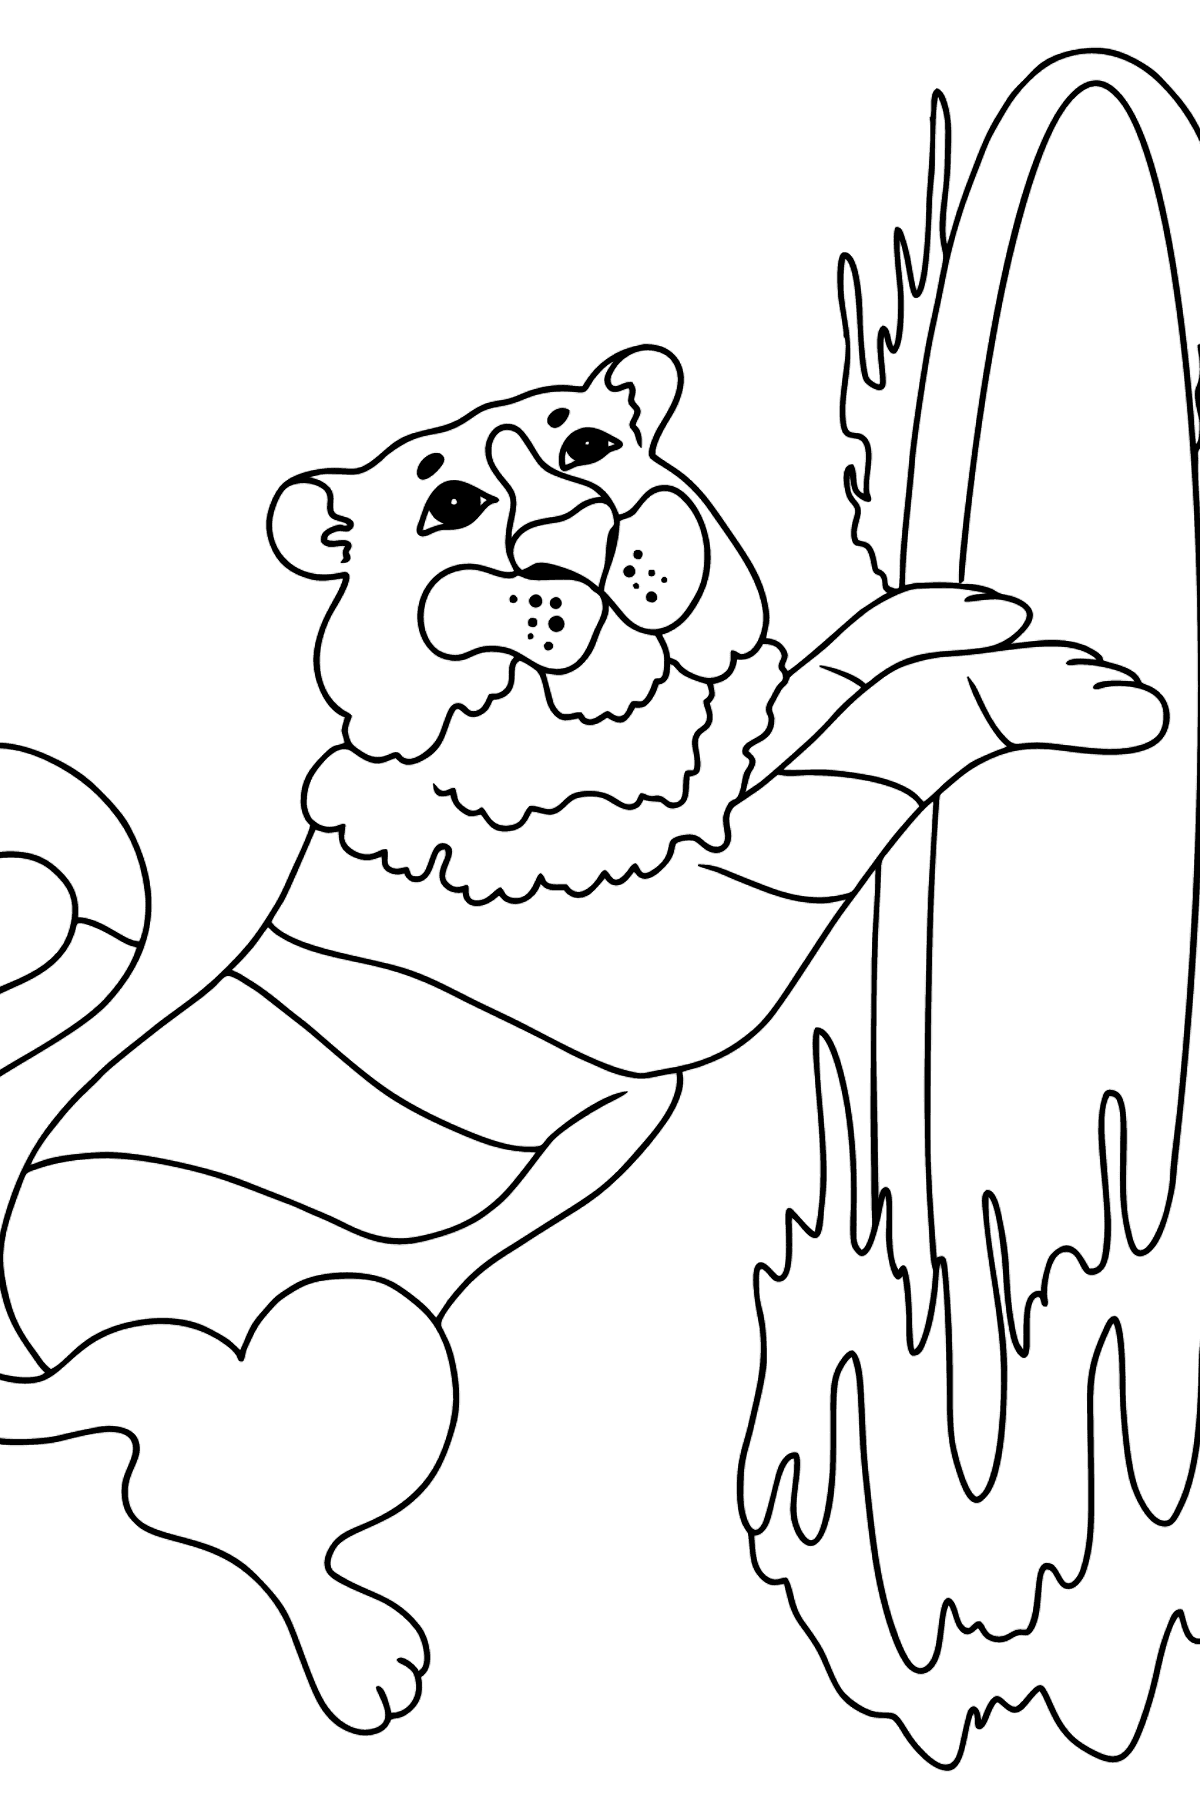 Coloring Page - A Tiger is Jumping Through a Ring of Fire - Coloring Pages for Kids